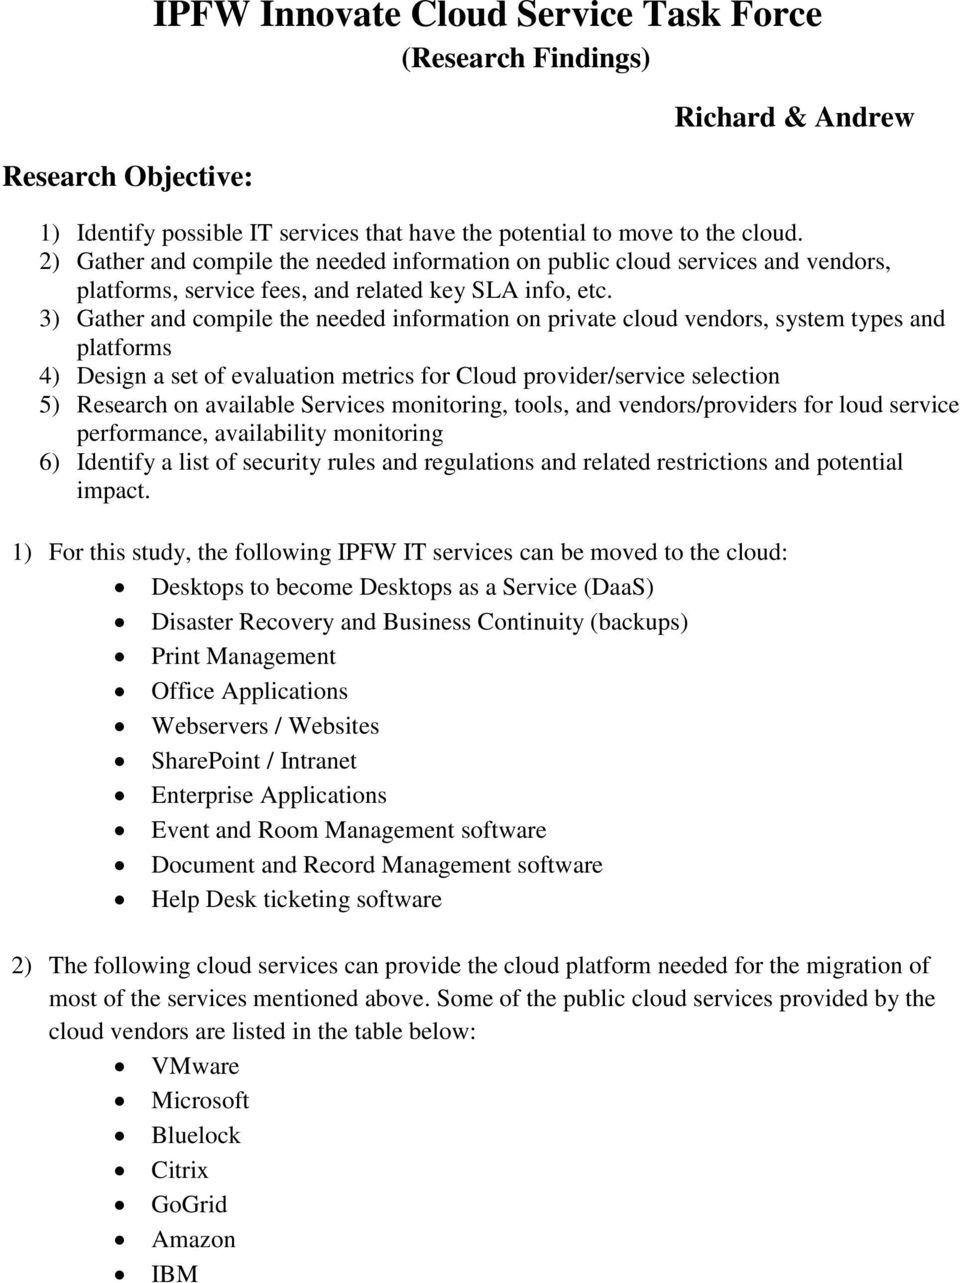 3) Gather and compile the needed information on private cloud vendors, system types and platforms 4) Design a set of evaluation metrics for Cloud provider/service selection 5) Research on available